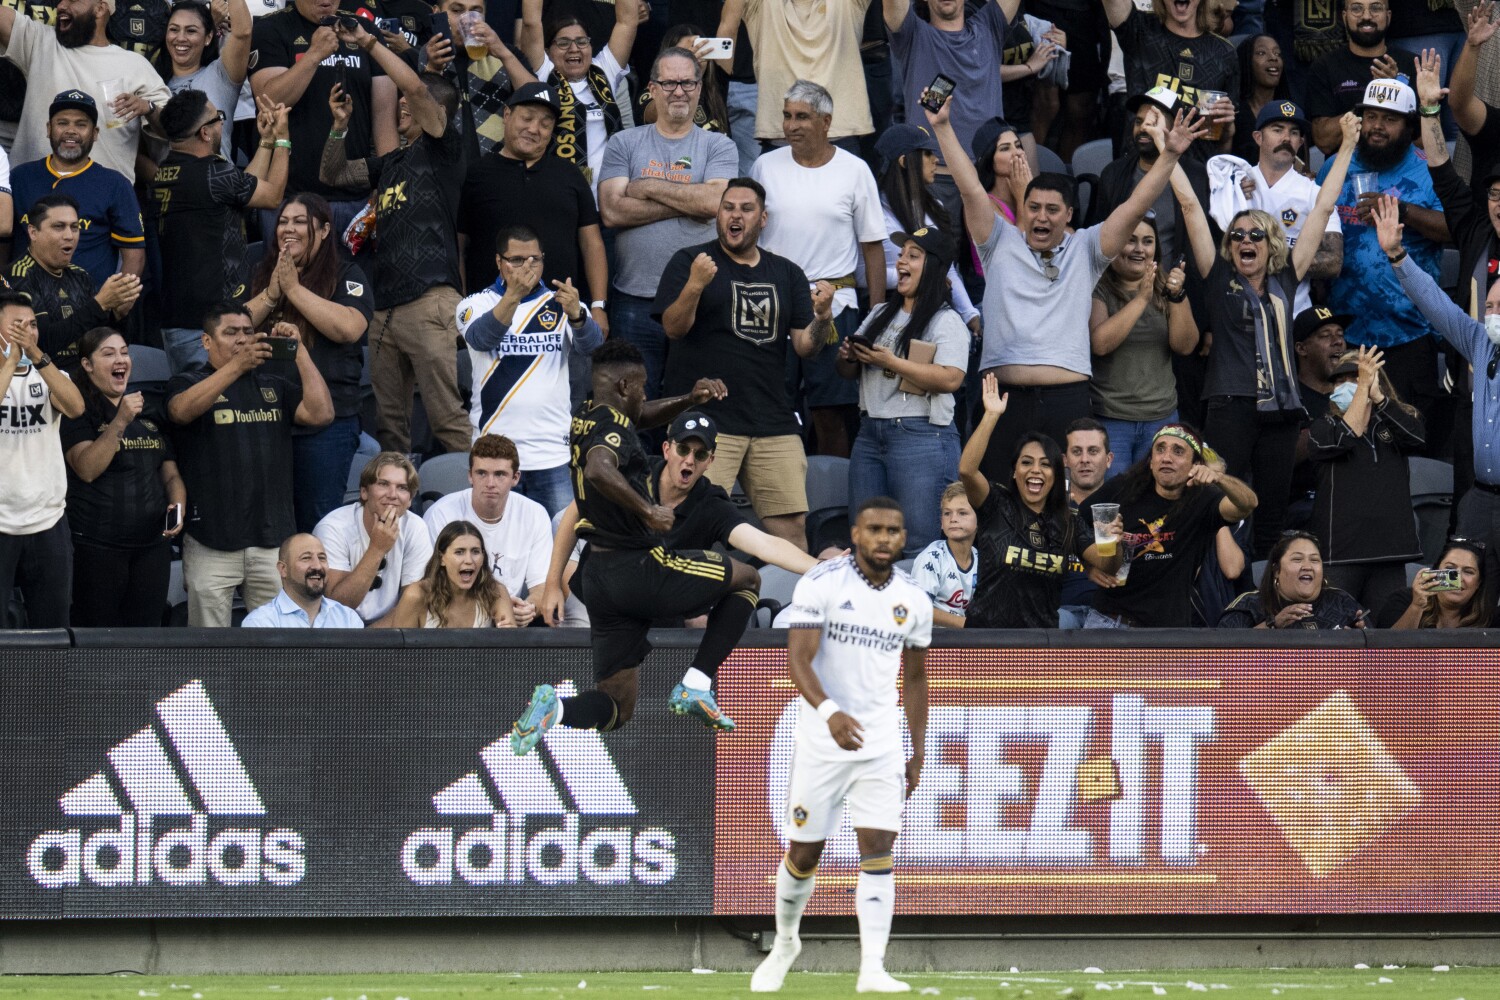 El Tráfico: New-look LAFC keeps rolling and picks up victory over rival Galaxy